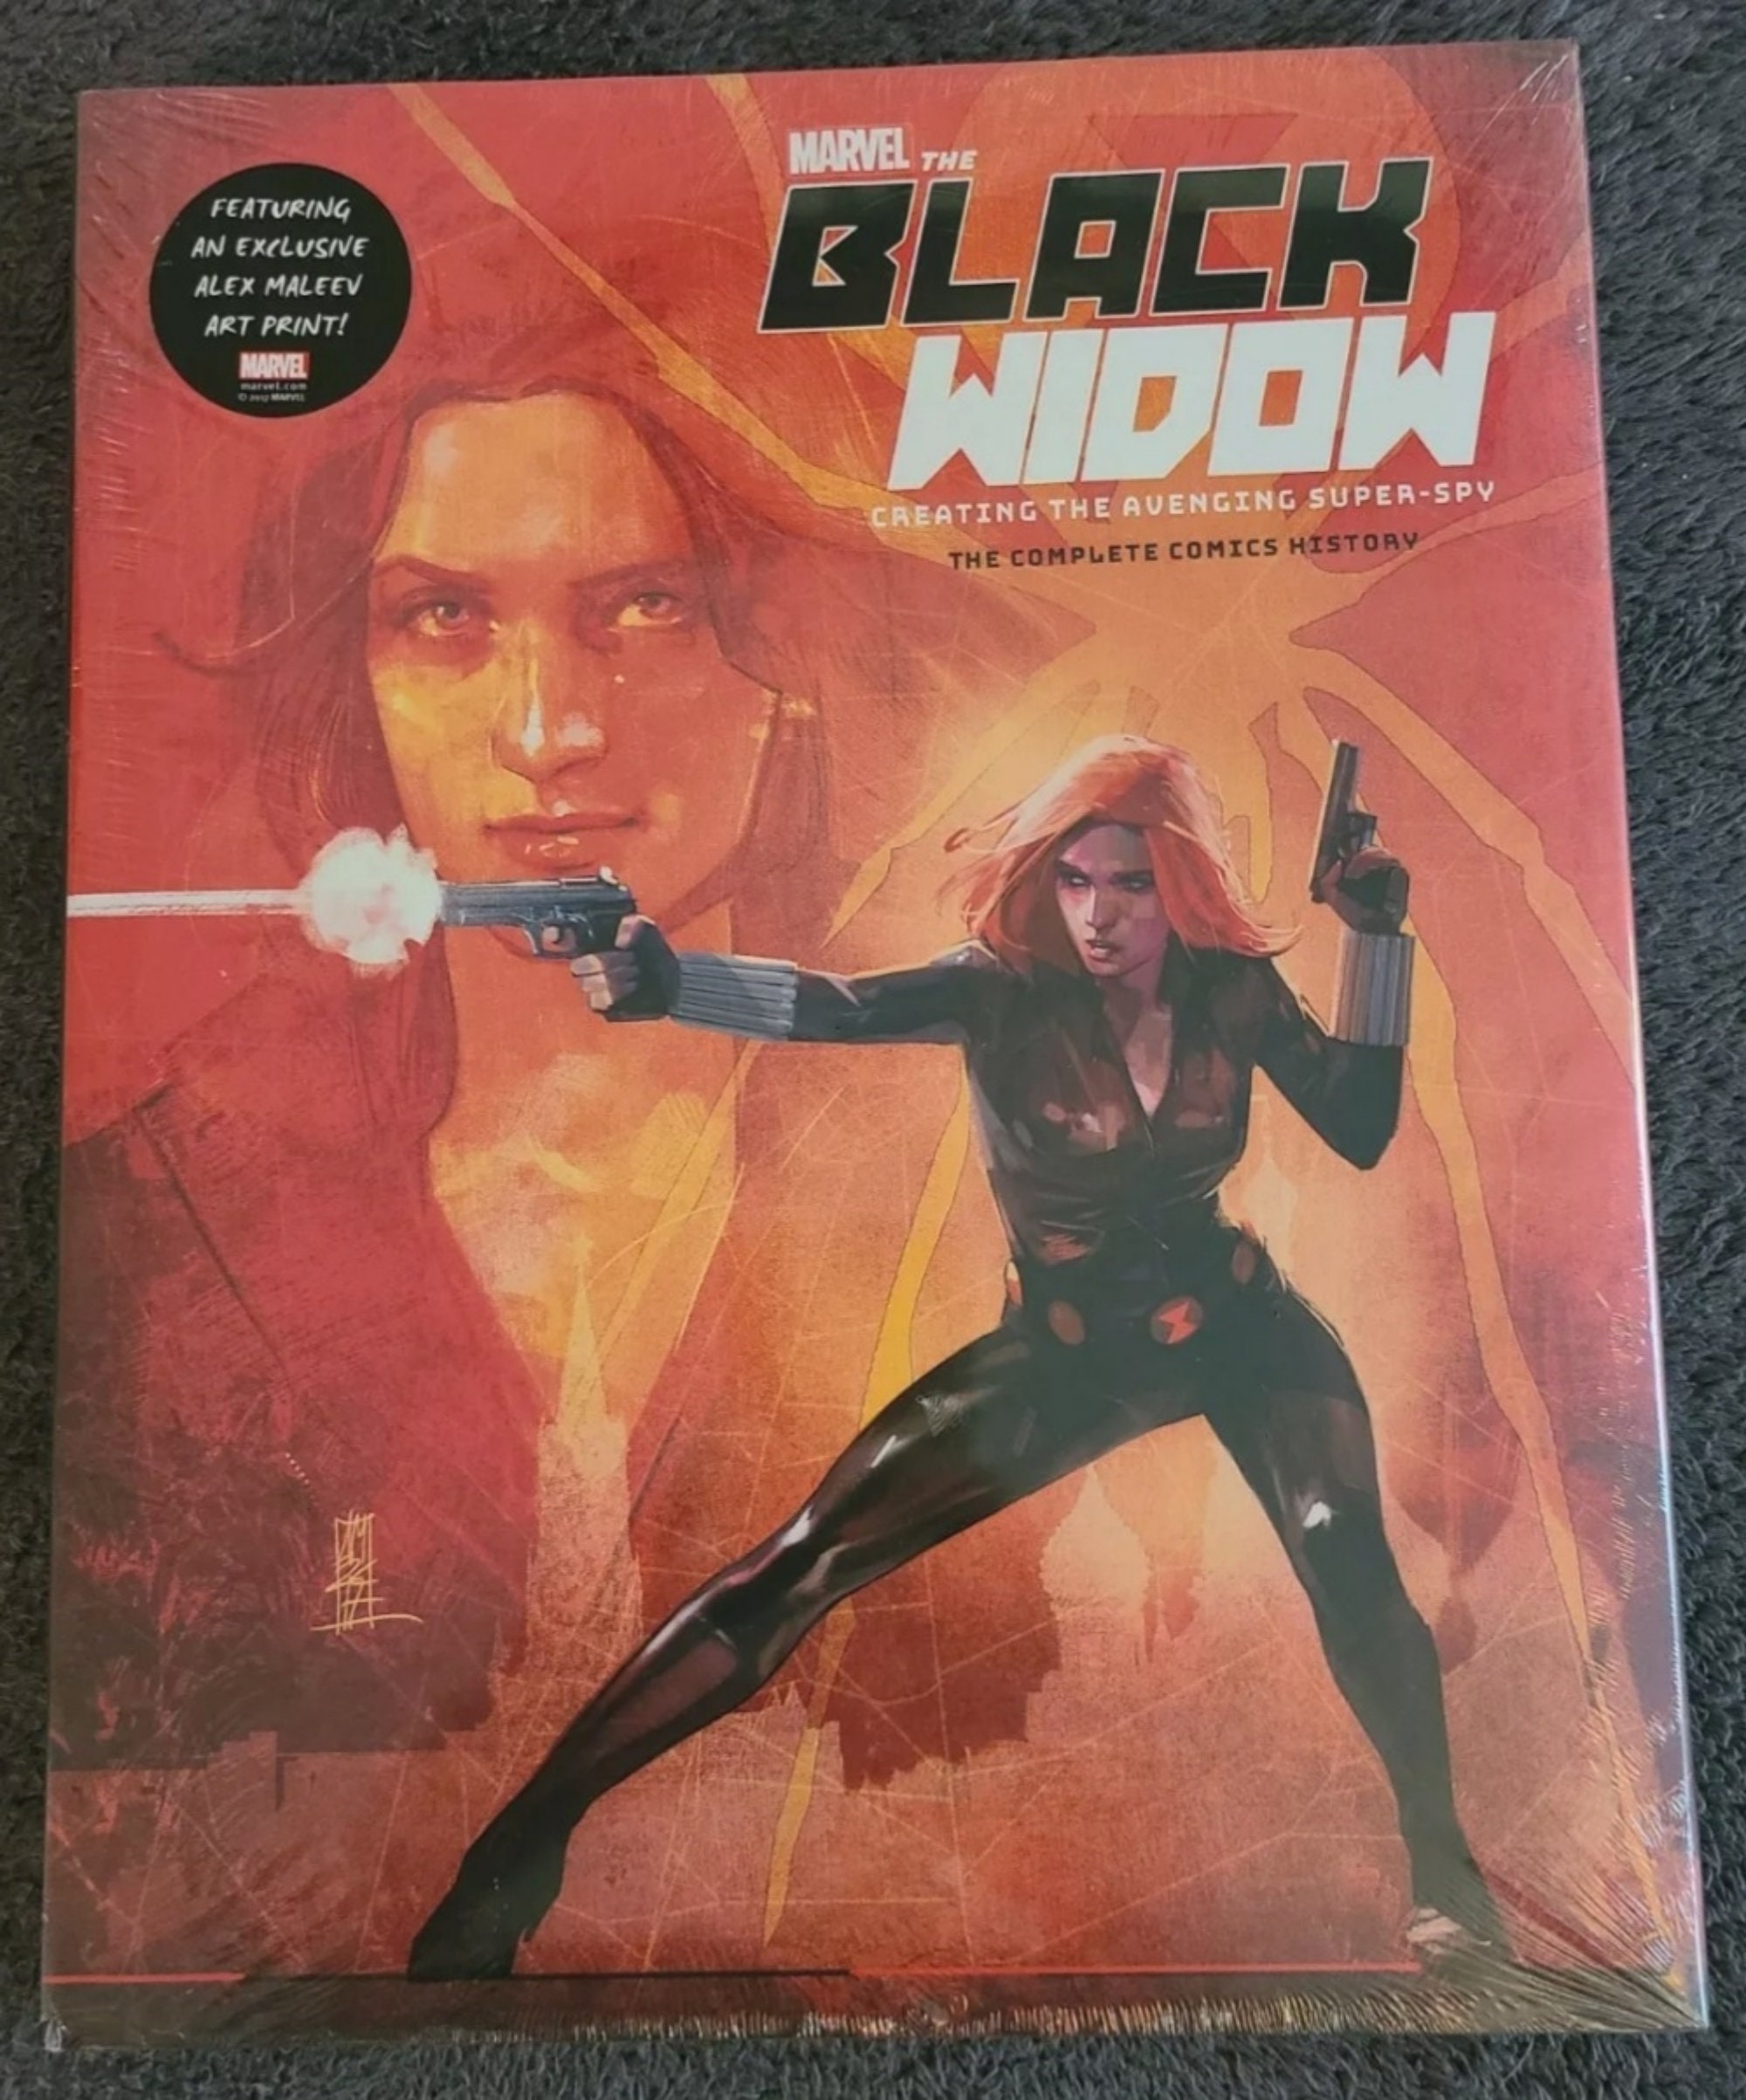 The History of Black Widow